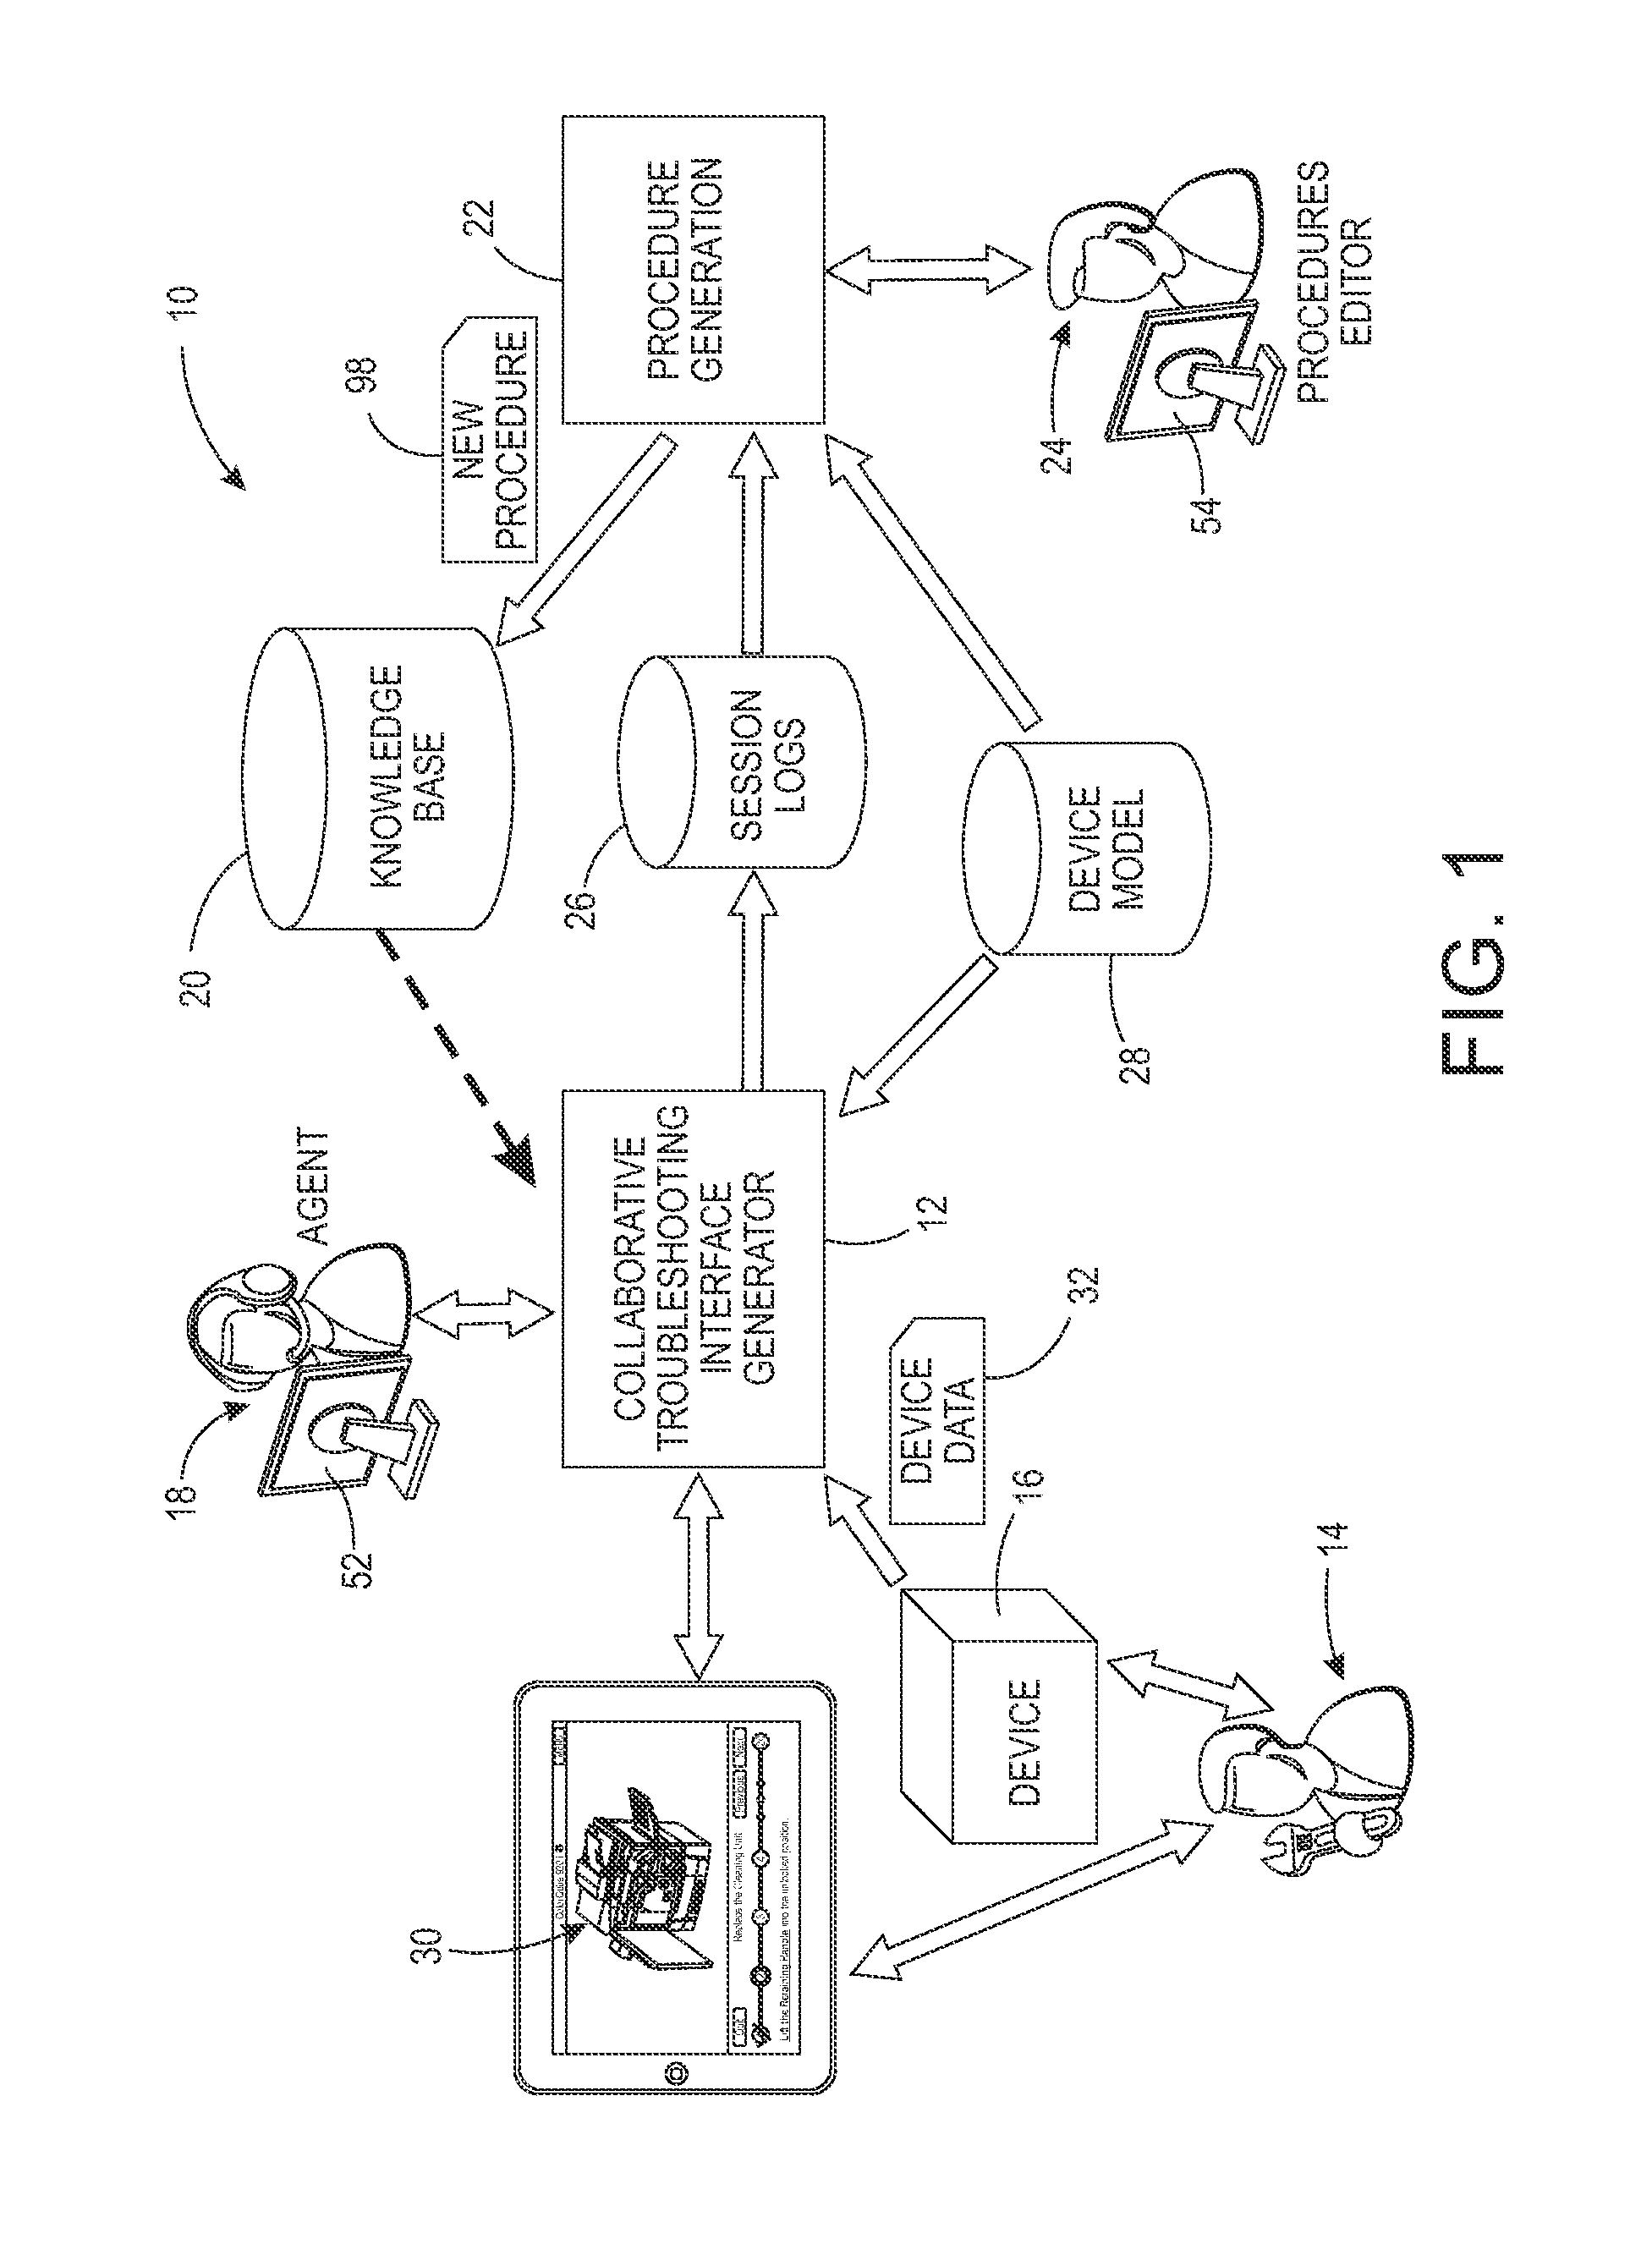 System and method for semi-automatic generation of operating procedures from recorded troubleshooting sessions